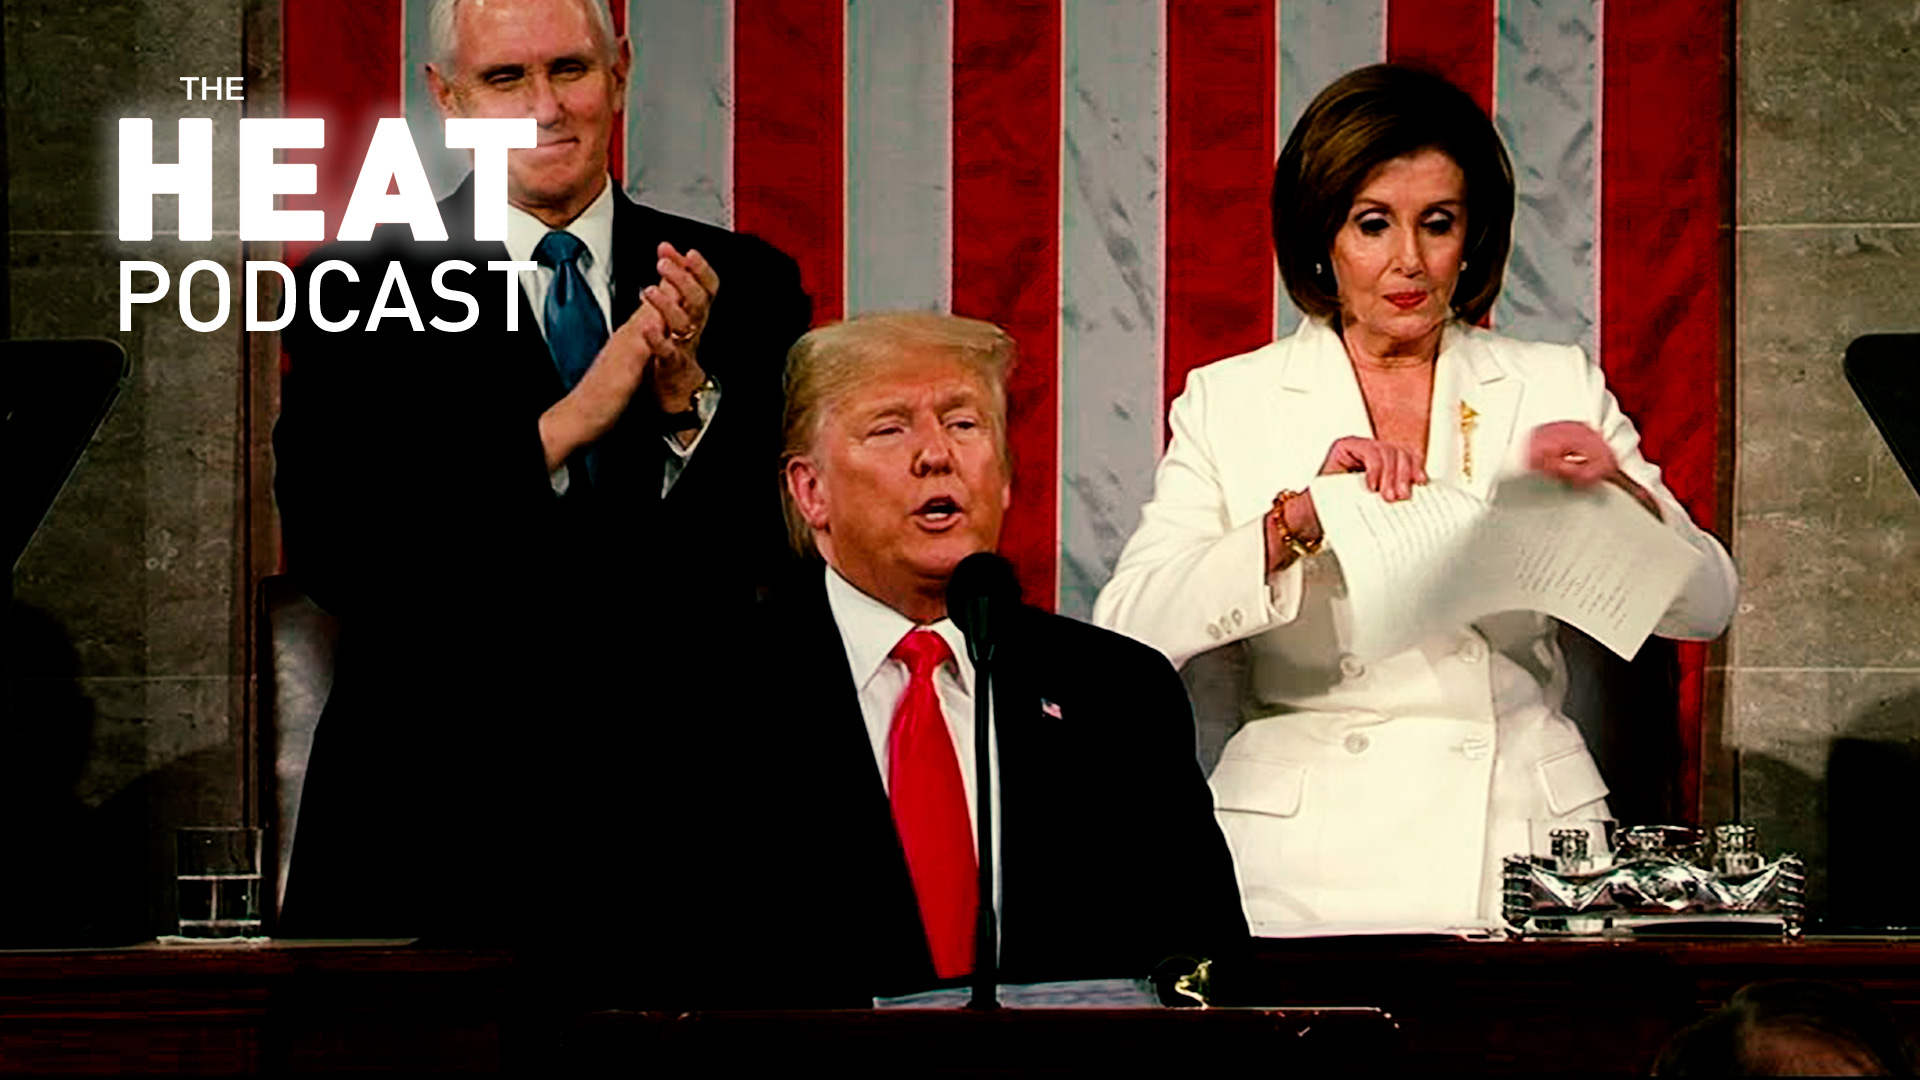 Trump's State of the Union